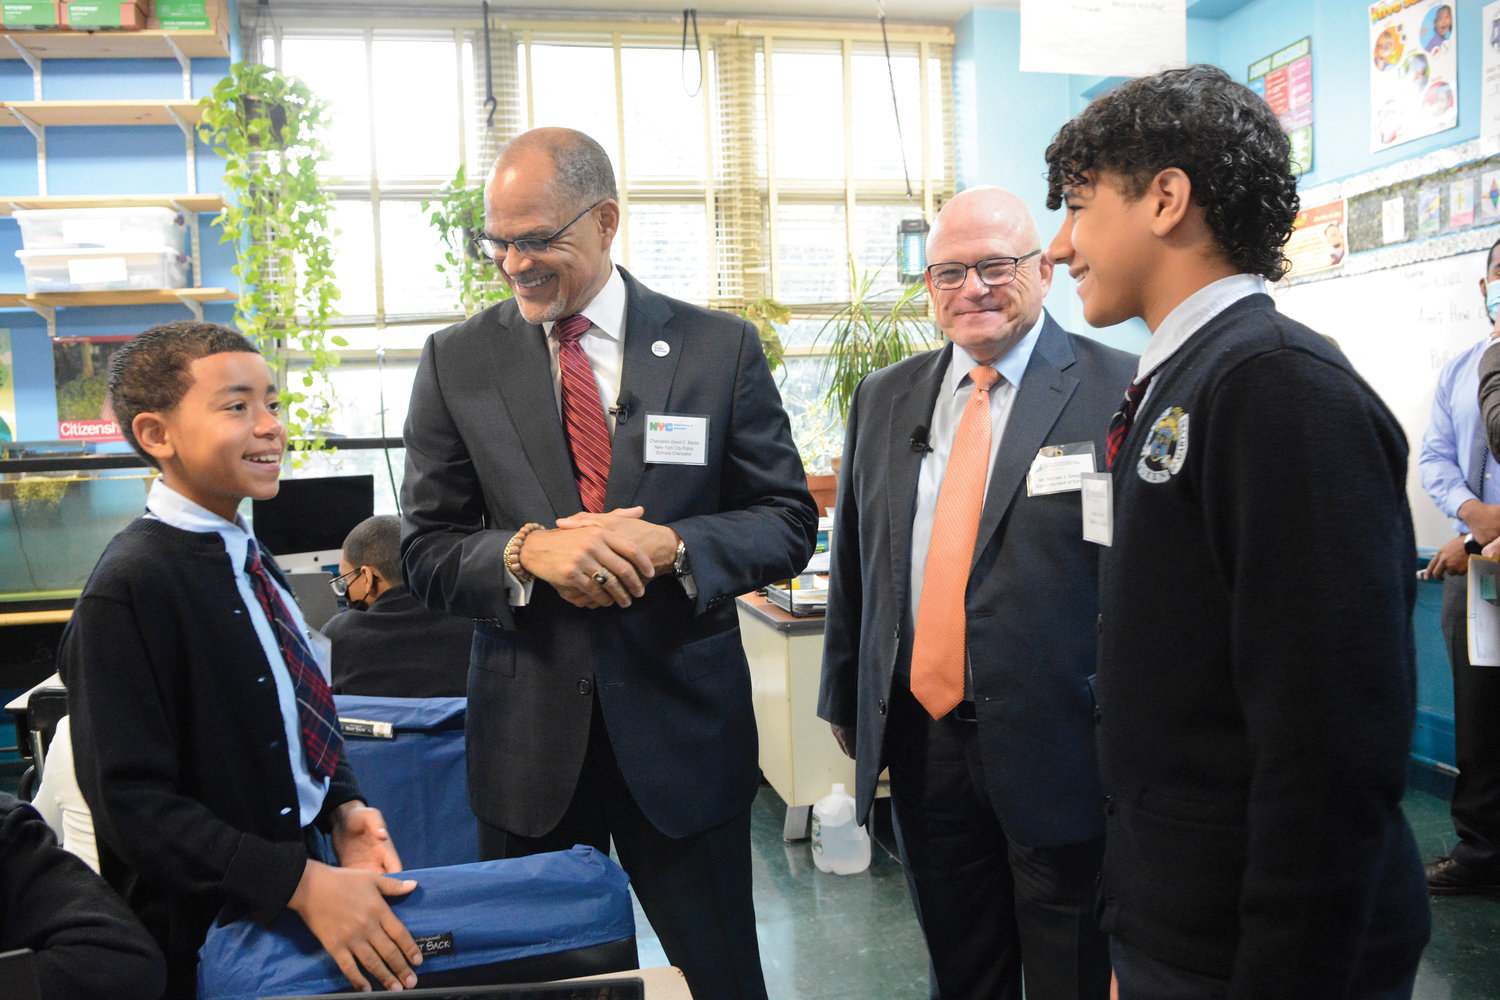 New York City Schools Chancellor David Banks and archdiocesan Superintendent of Schools Michael Deegan, second and third from left, cheerfully converse with Mathias Dominguez, far left, and Bryan Ramirez, eighth-graders and student tour guides at Our Lady Queen of Martyrs School in the Inwood section of Manhattan Oct. 4. The administrators toured Queen of Martyrs at 71 Arden St. and two nearby public schools, Muscota New School and Amistad Dual Language School, at 4862 Broadway.